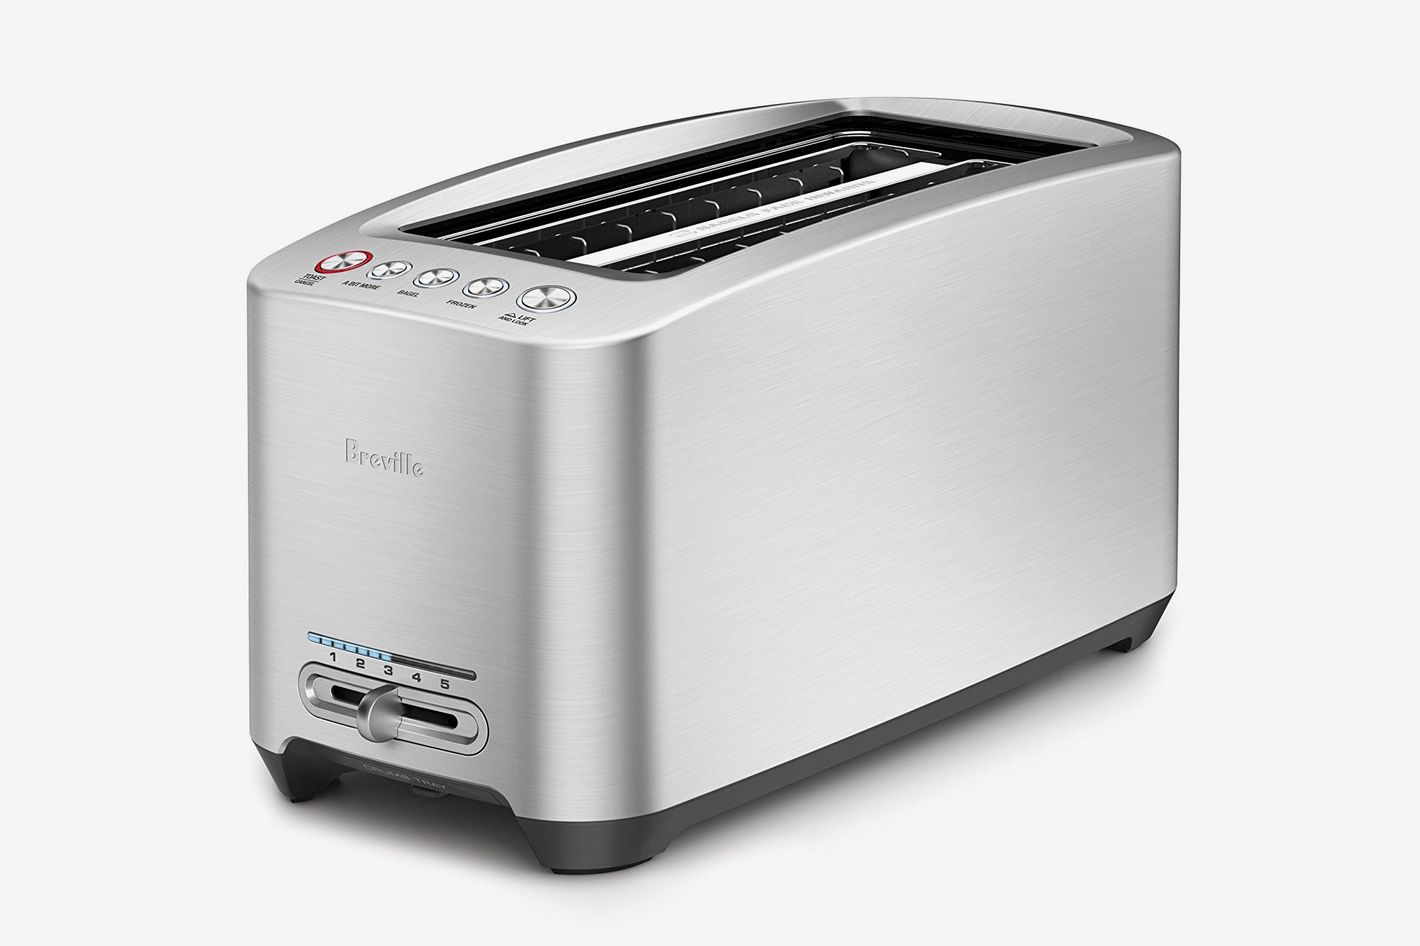 Featuring High-Lift Defrost Toaster 6 Shade Settings & Warming Rack Reheat Extra-Wide Slot Toaster with Cool Wall Long Slot Toaster 4 Slice Stainless Steel Toaster Cancel Functions